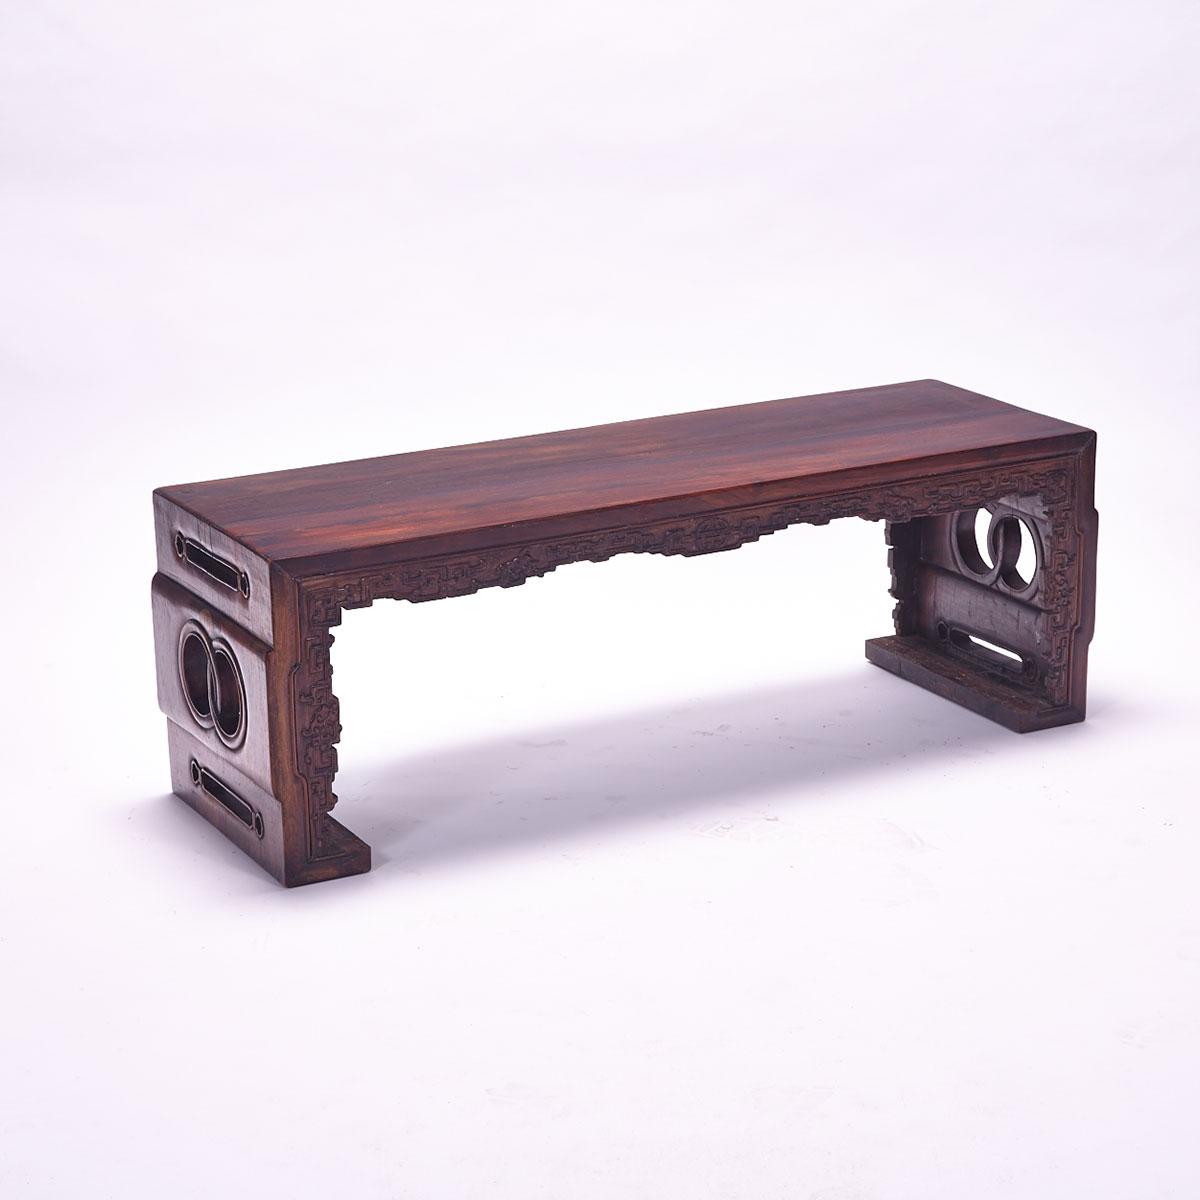 Suanzhi Wood Low Carved Coffee Table, Late Qing Dynasty